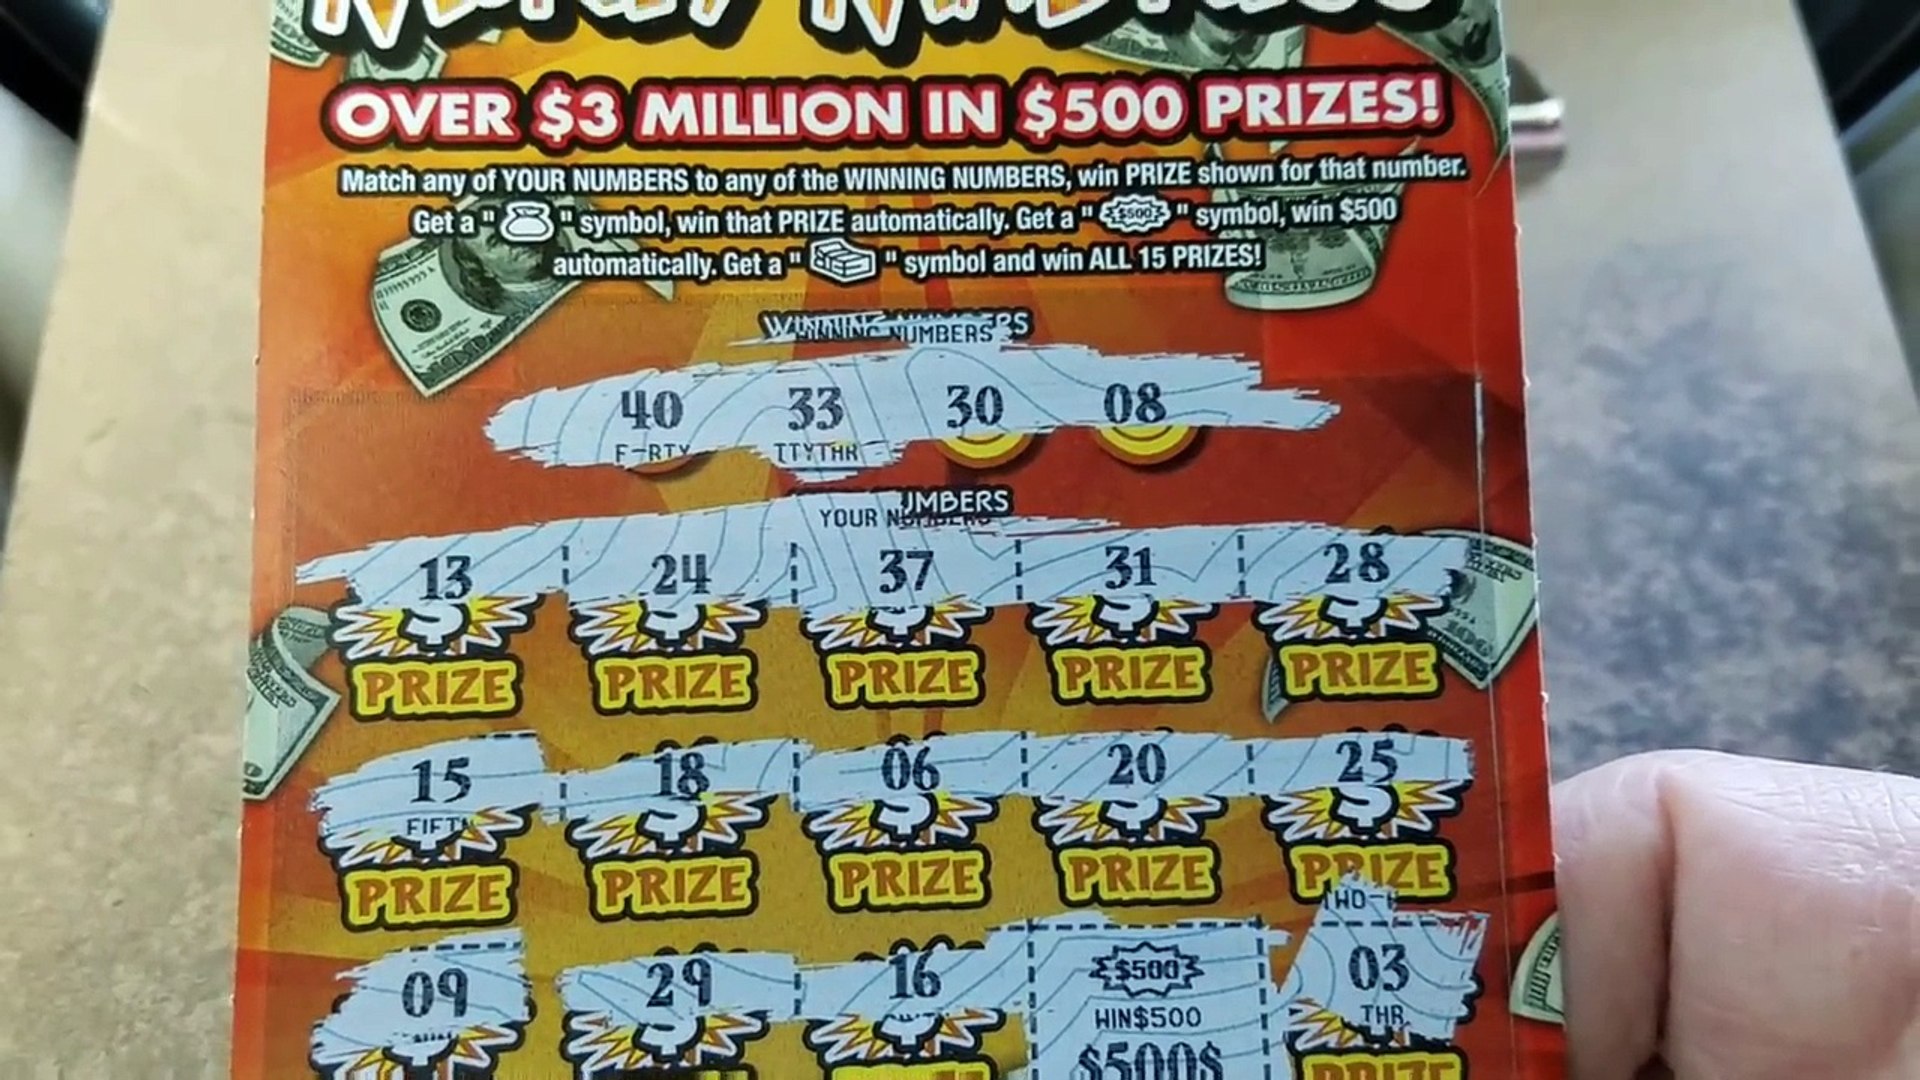 new jersey lottery scratch off tickets